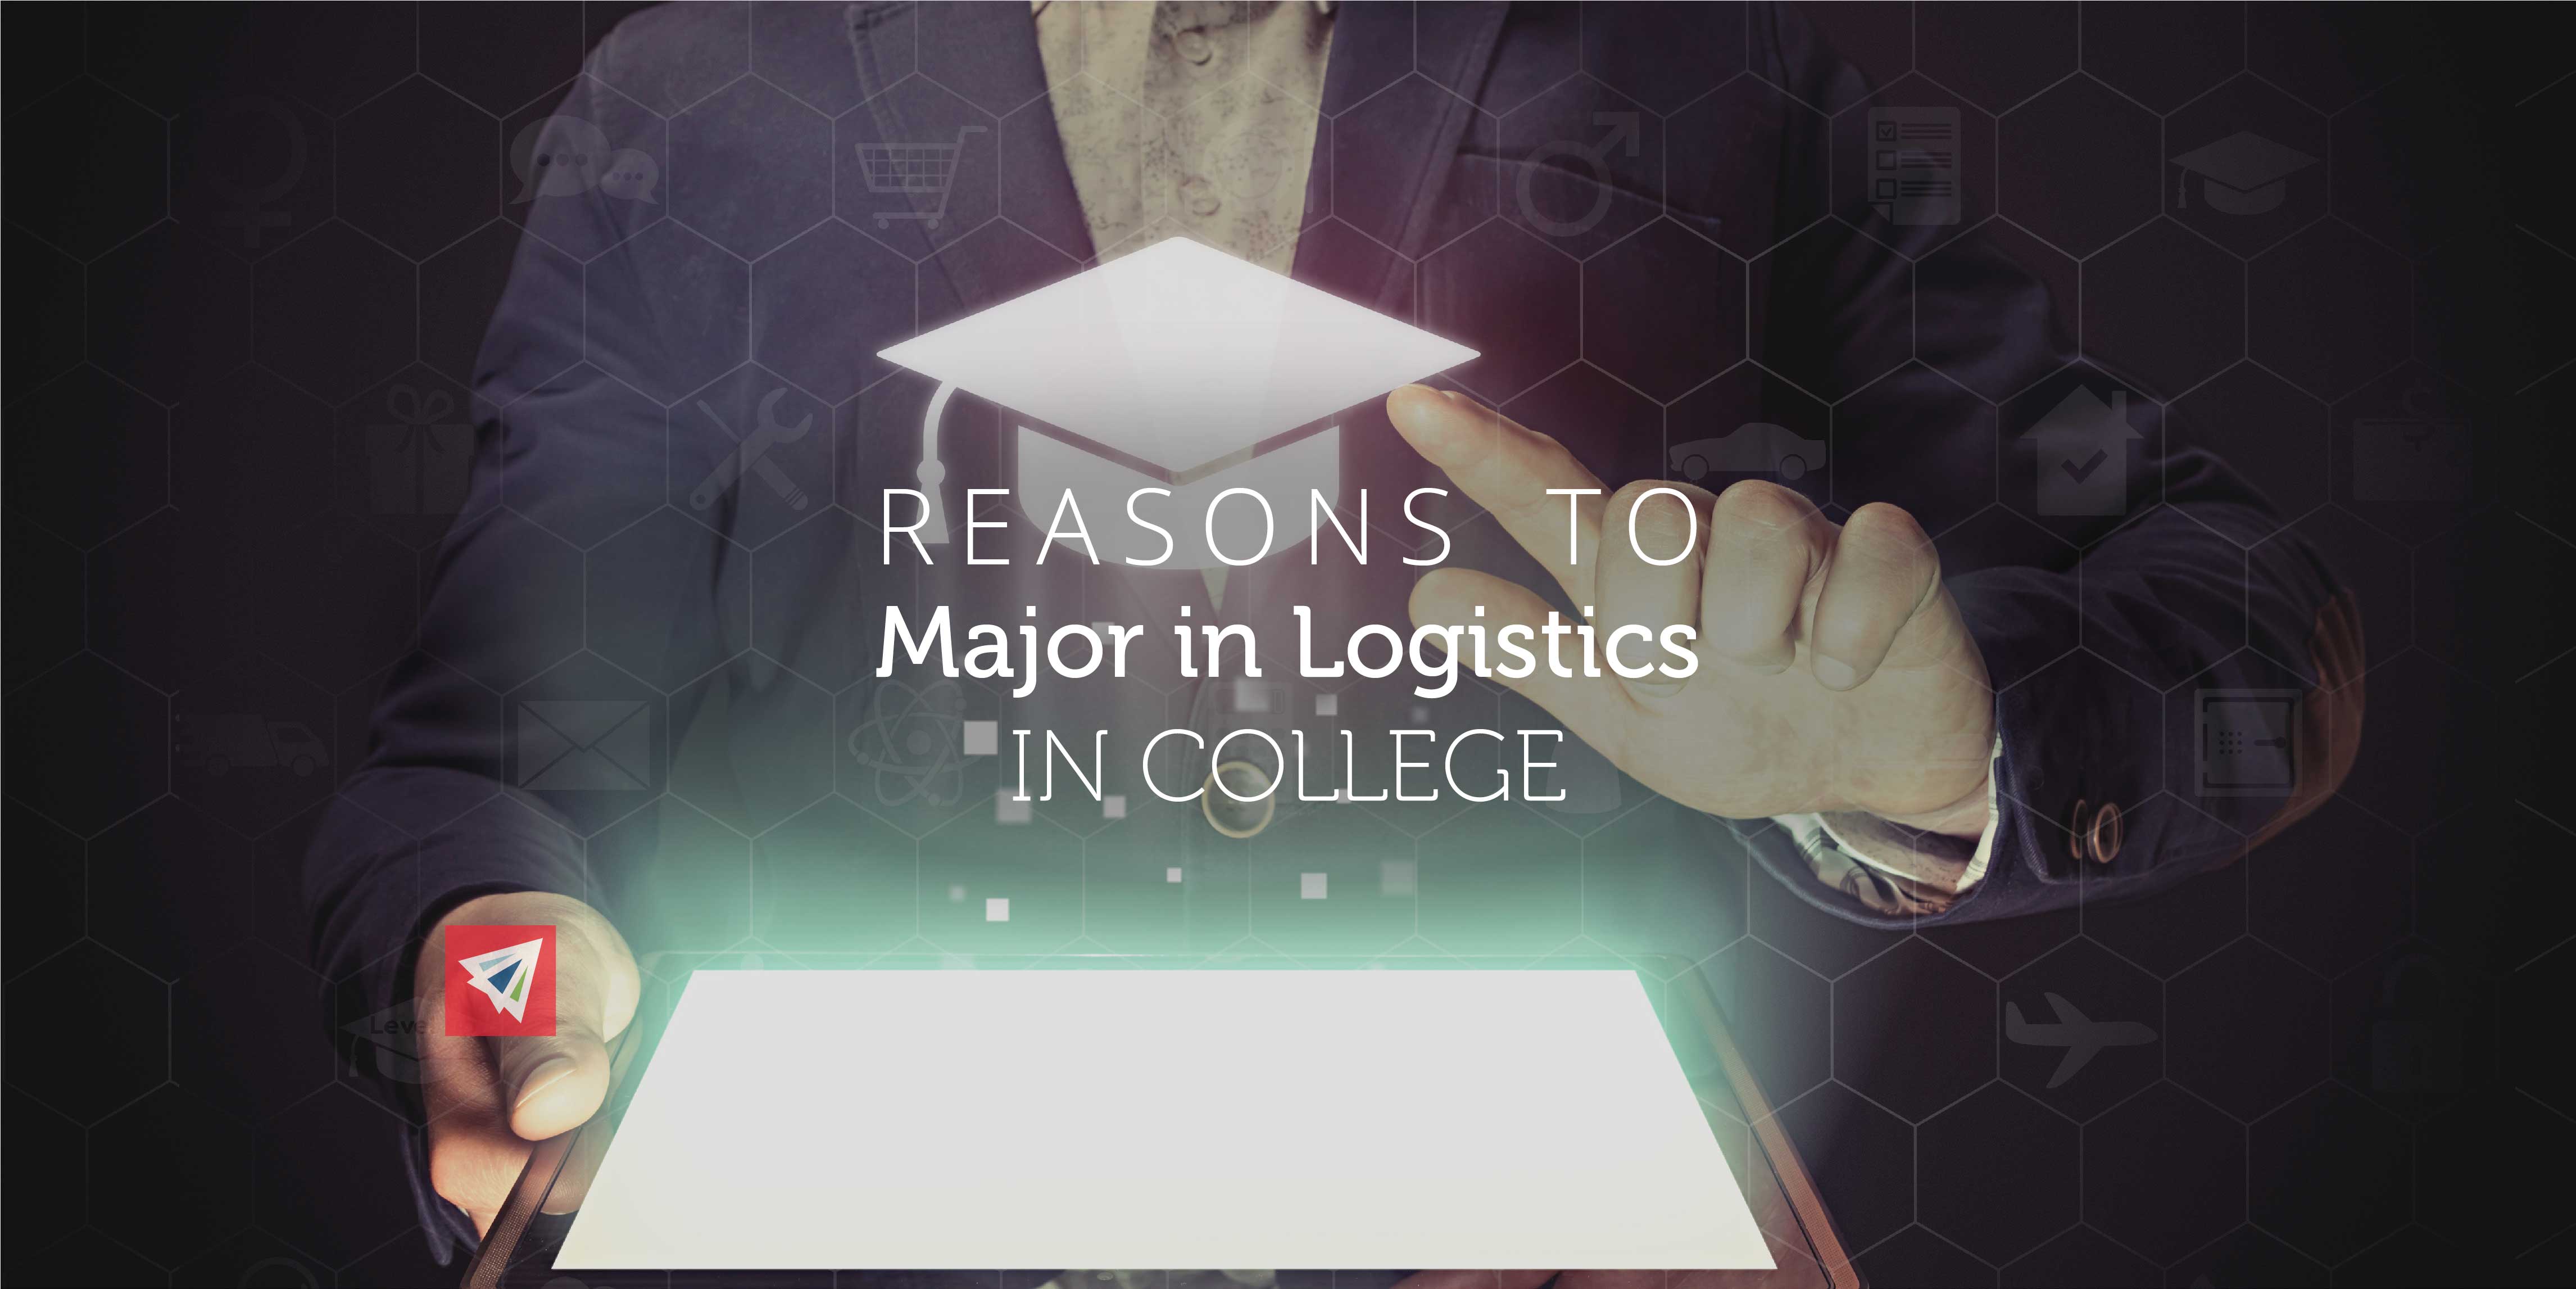 Reasons to Major in Logistics in College